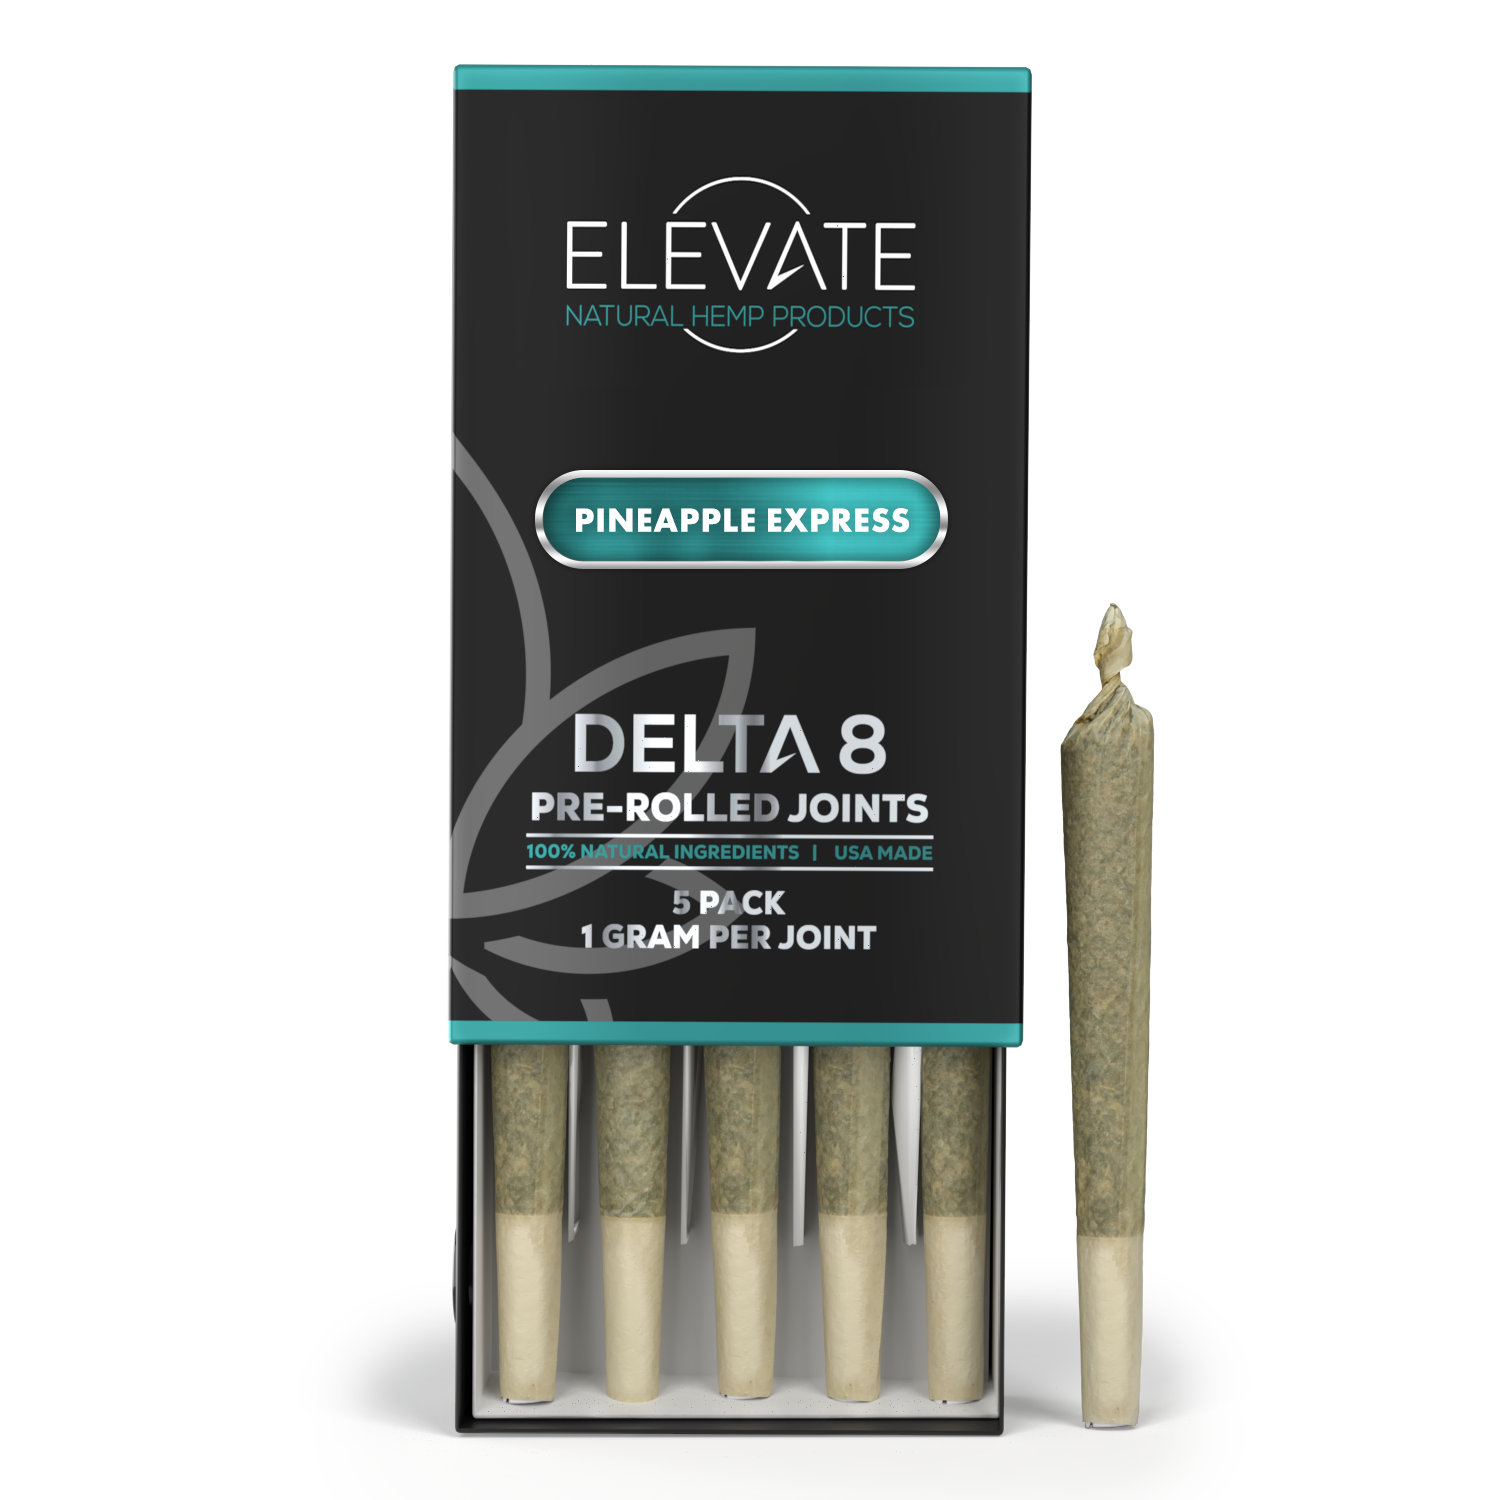 DELTA-8 PRE ROLLS By Elevateright-Comprehensive Review of the Finest Delta-8 Pre-Rolls